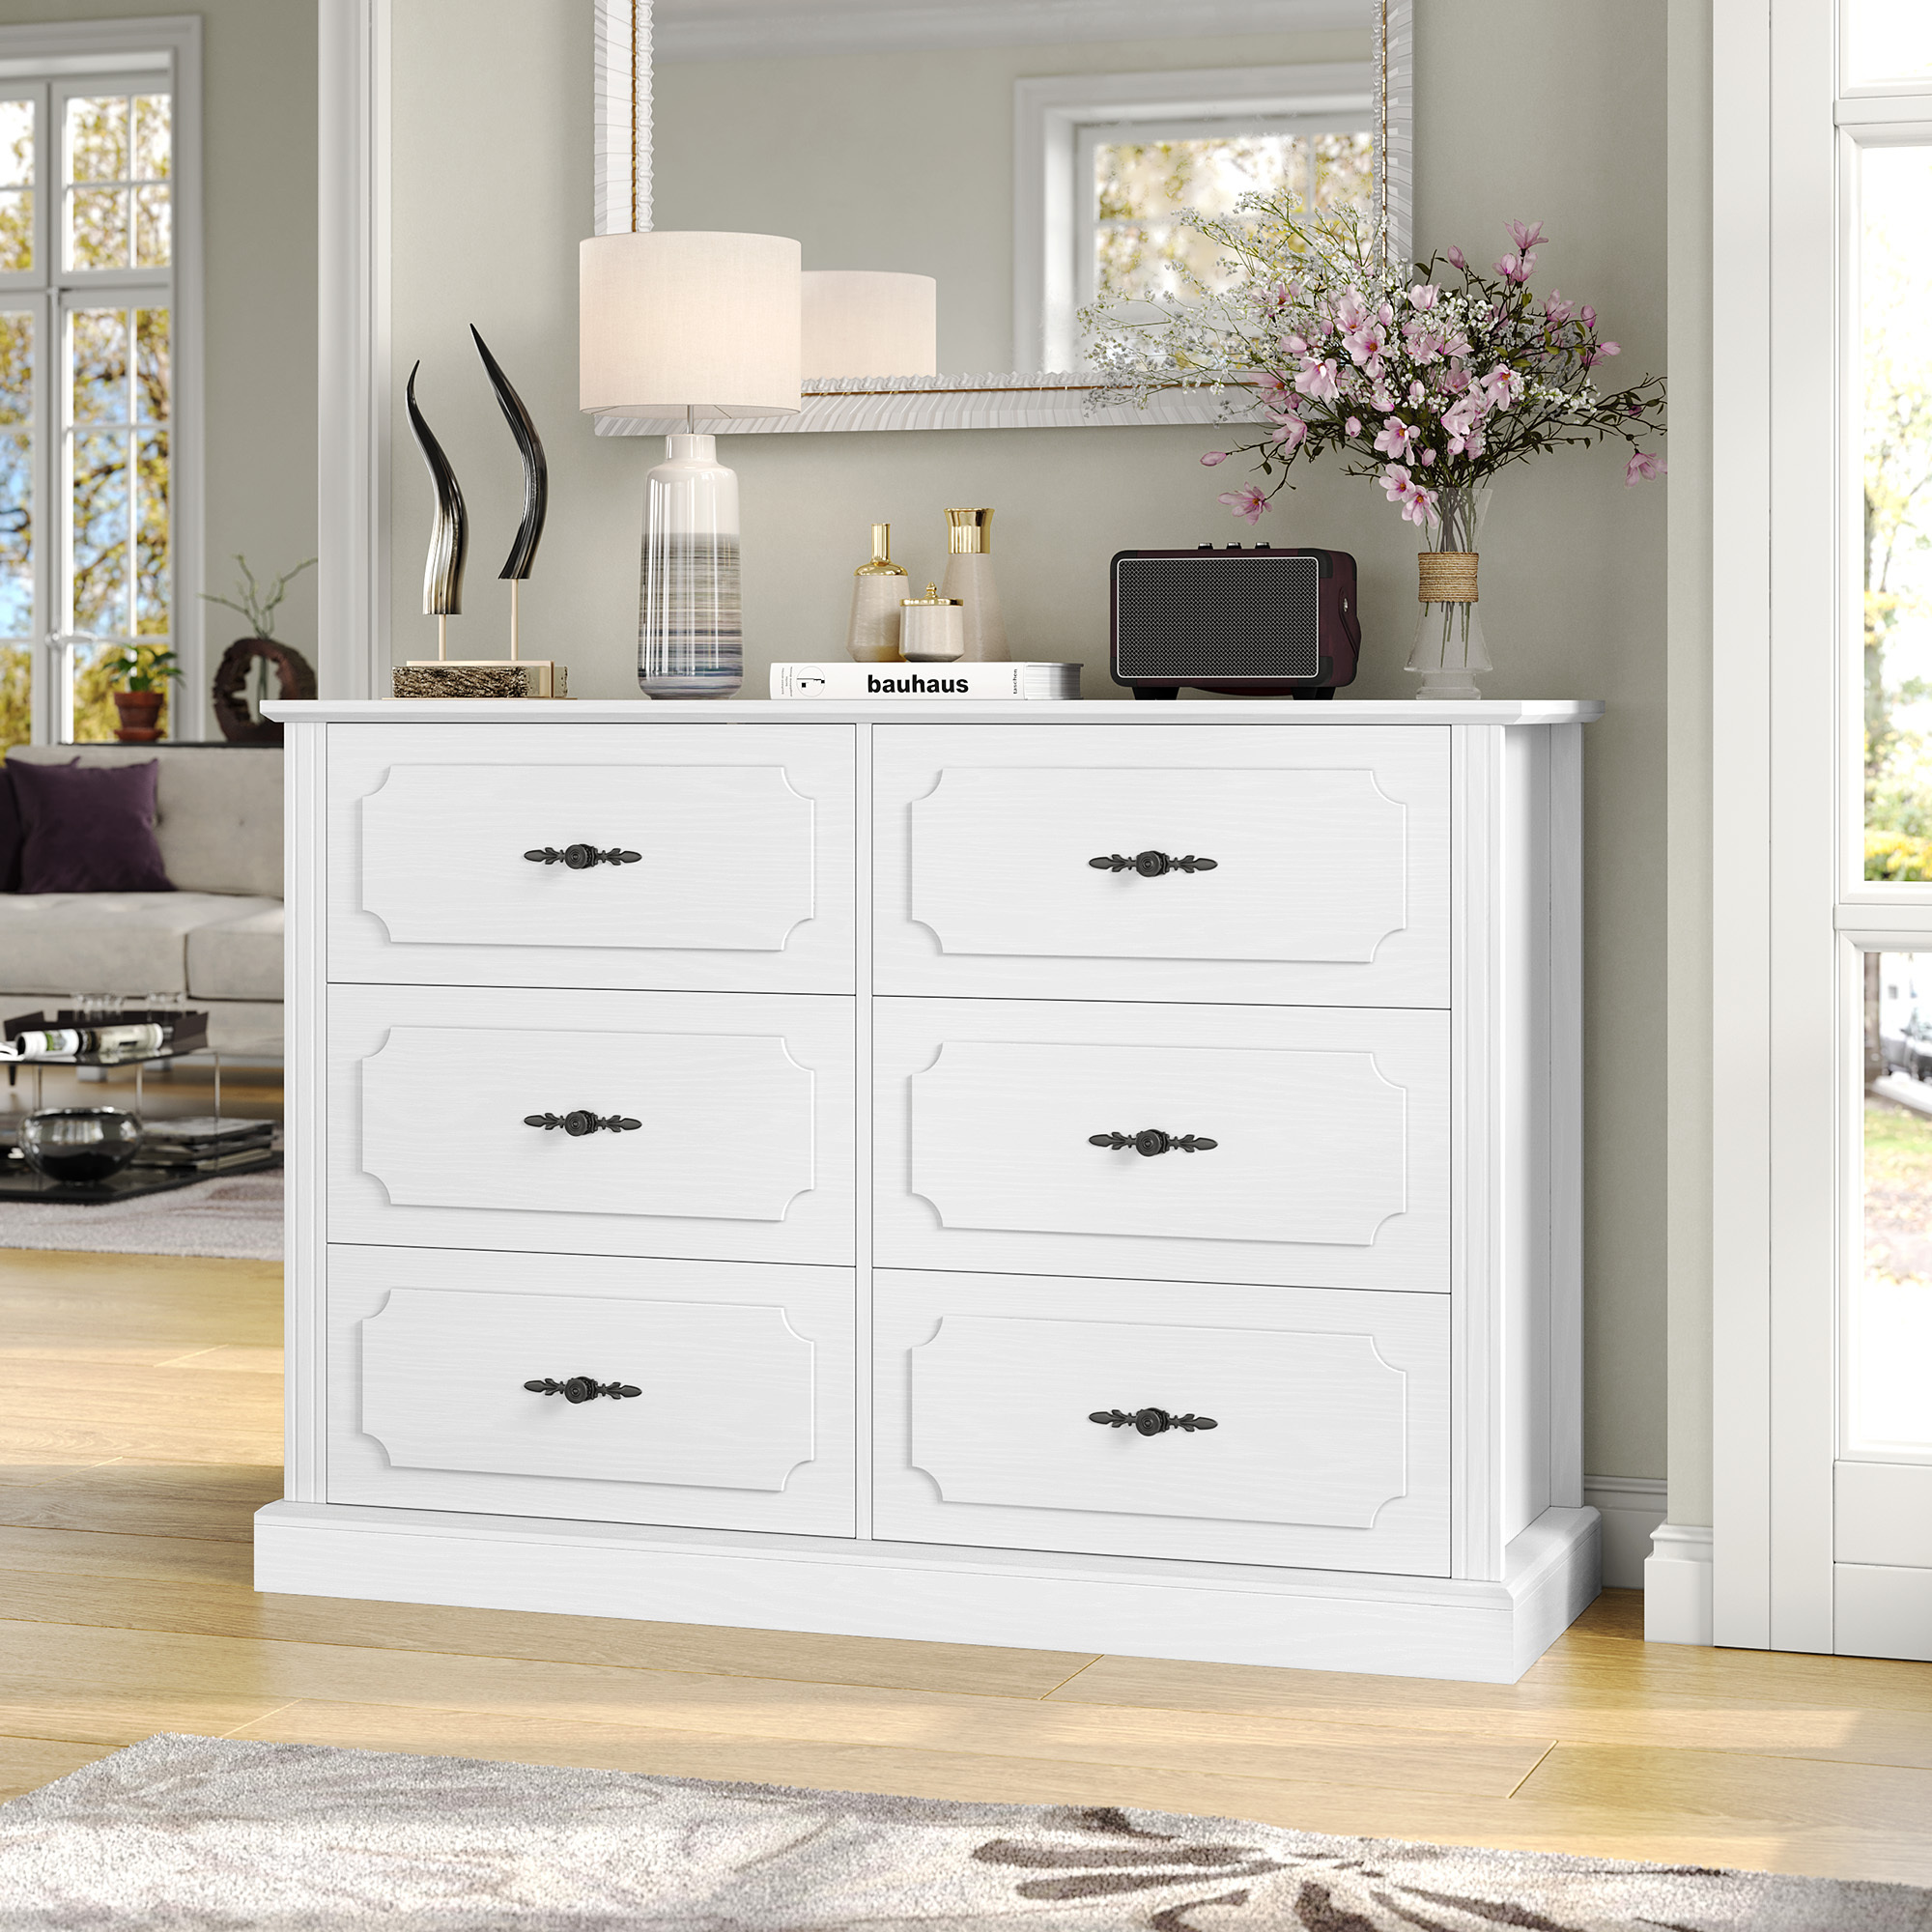 Homfa 6 Drawer White Double Dresser for Bedroom, Classic Wood Storage Cabinet for Living Room with Wide Top - image 5 of 7